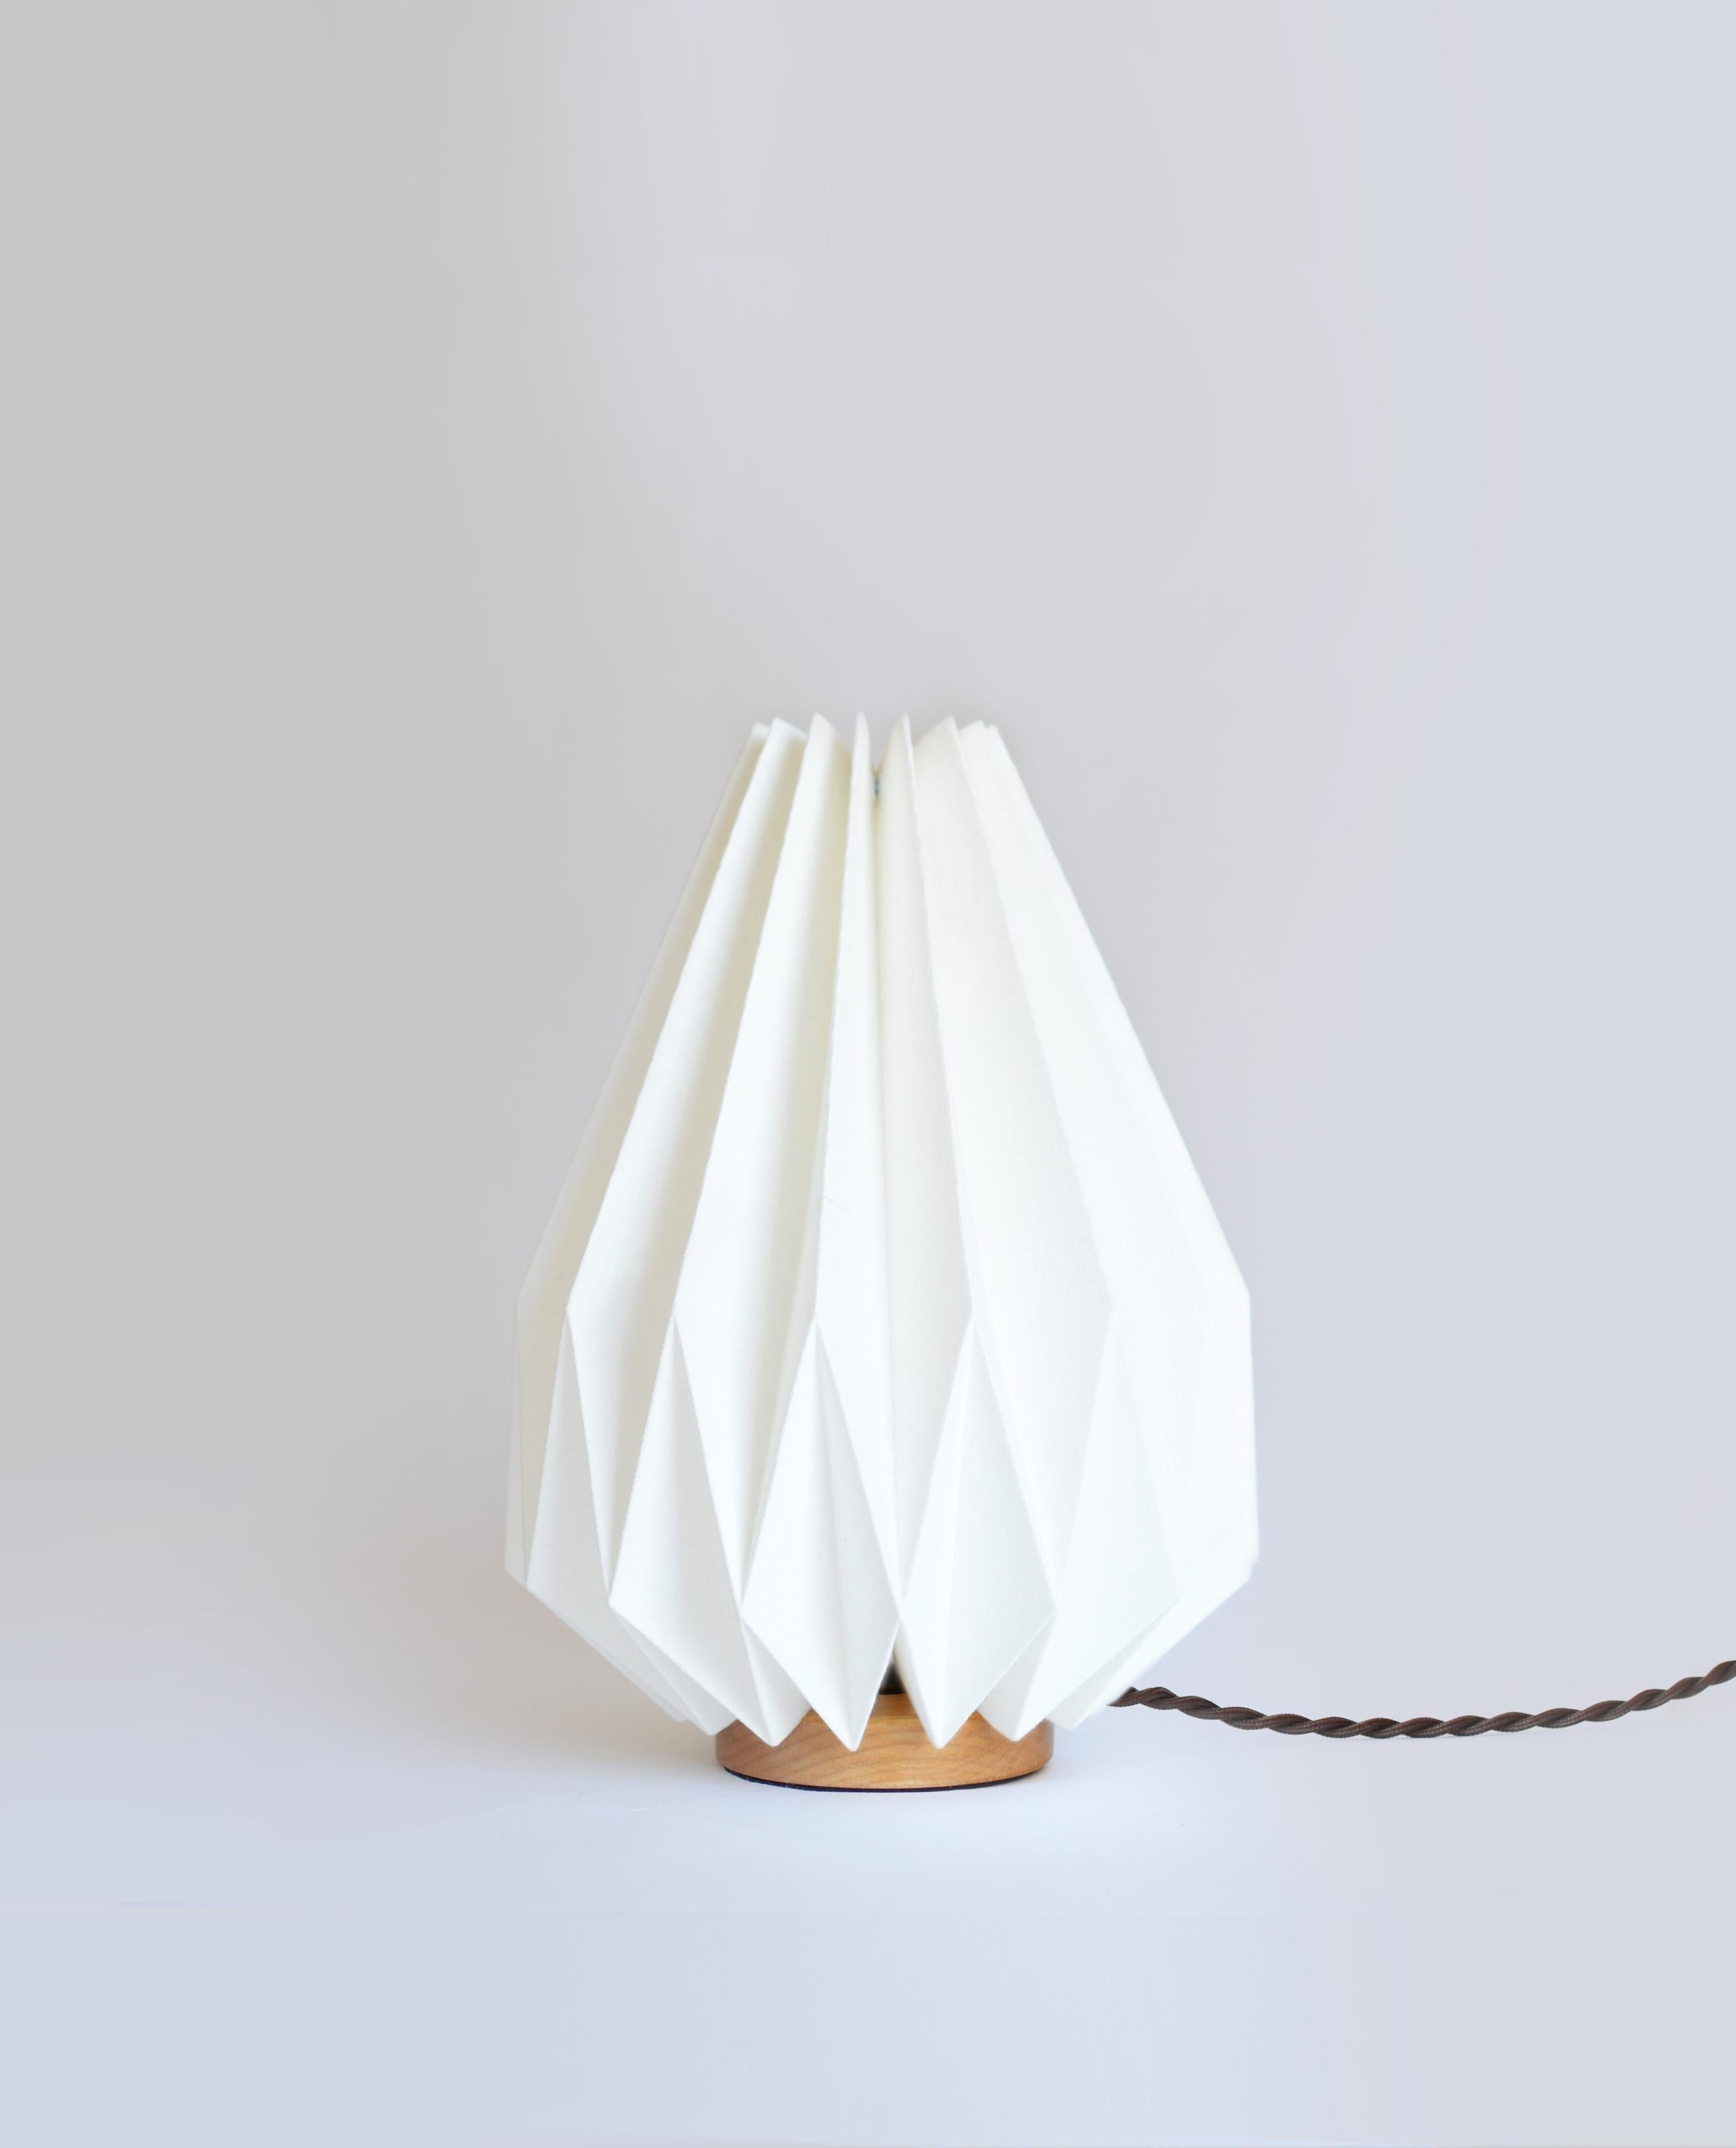 Made of a linen shade with a simple handcrafted wooden base, this table lamp will bring to your interior an interesting and functional work of art. The origami-inspired lampshade provides a bright, yet soft ambient light and shows the beautiful